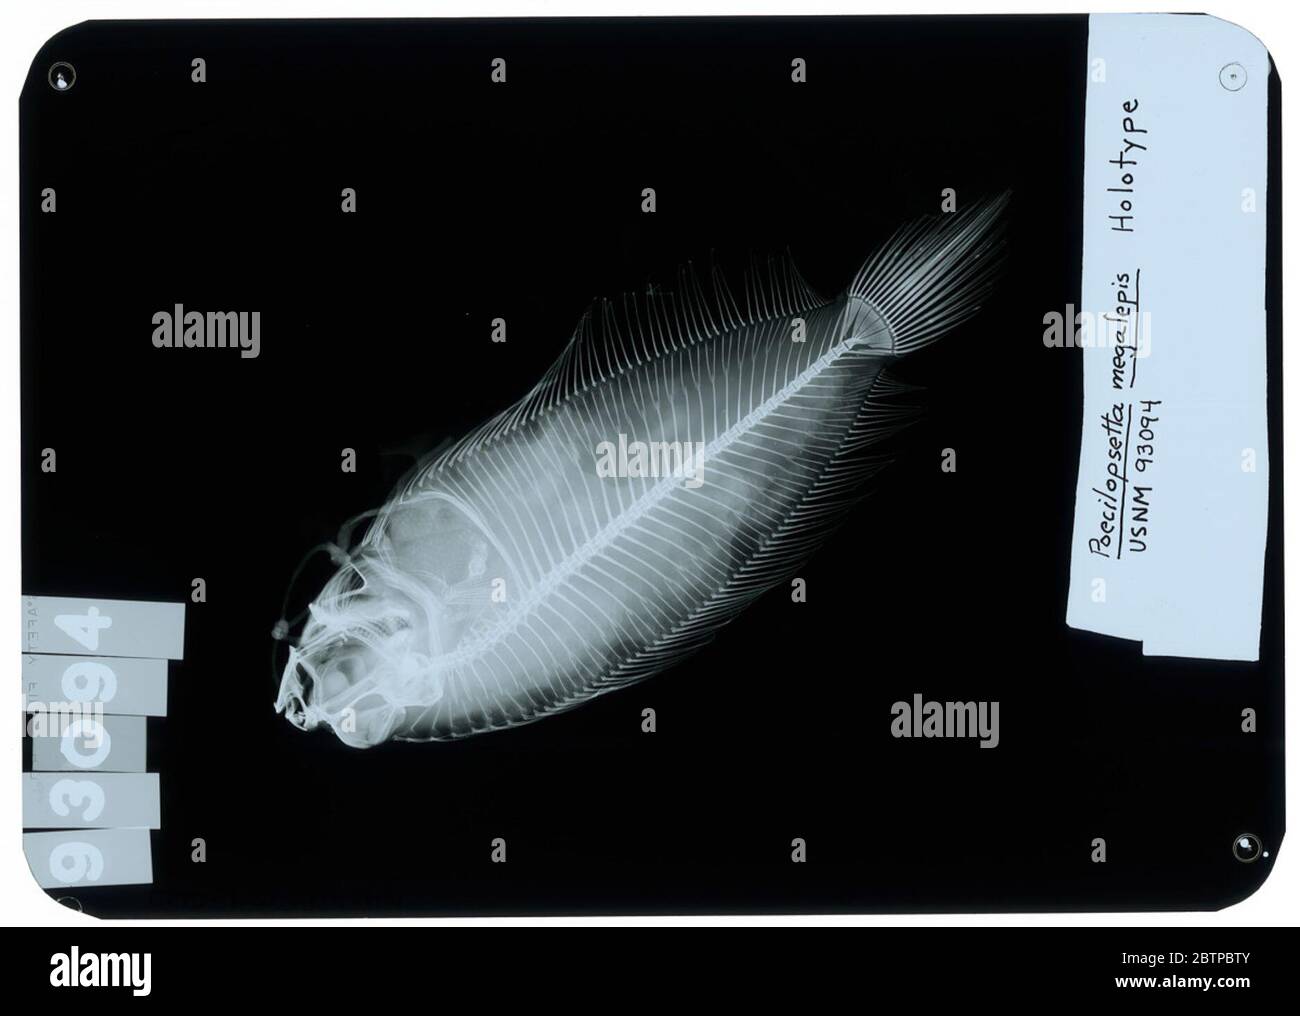 Poecilopsetta megalepis Fowler. Radiograph is of a holotype; The Smithsonian NMNH Division of Fishes uses the convention of maintaining the original species name for type specimens designated at the time of description. The currently accepted name for this species is Poecilopsetta plinthus.29 Oct 2018D. 51175 Stock Photo